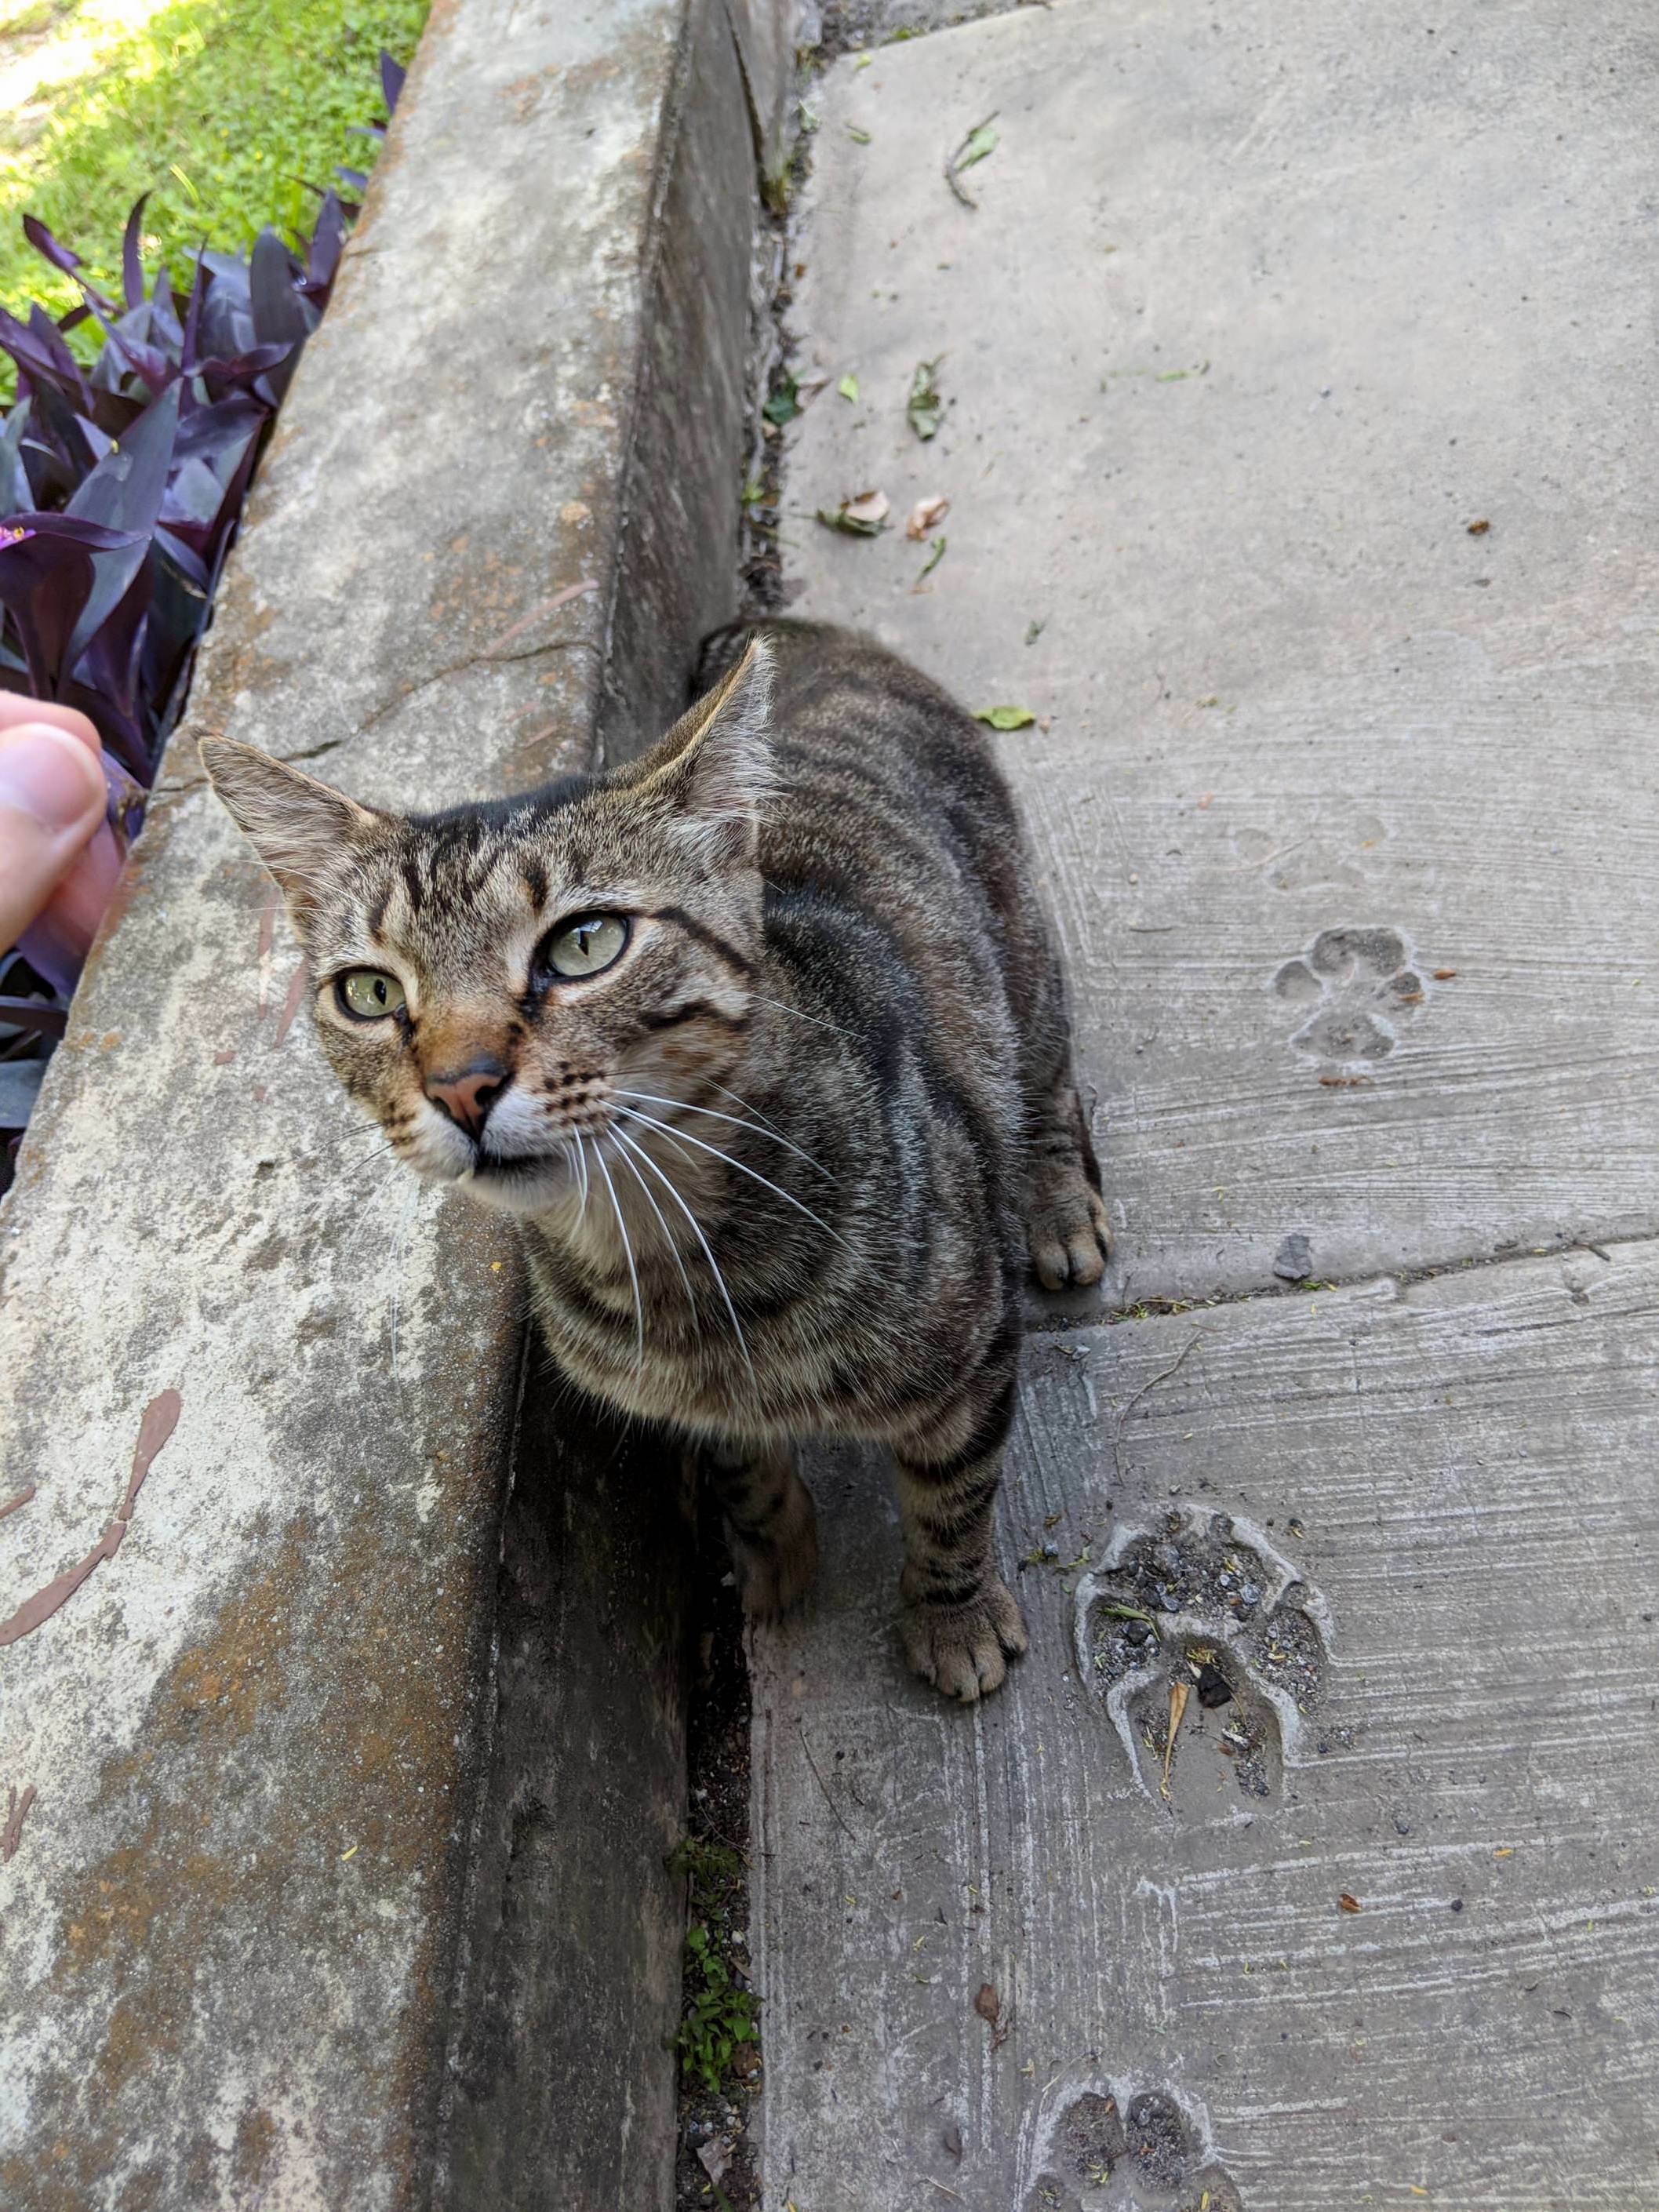 Meet our neighborhood cat, she comes to you when you call her over and loves to be pet. we call her popcorn )